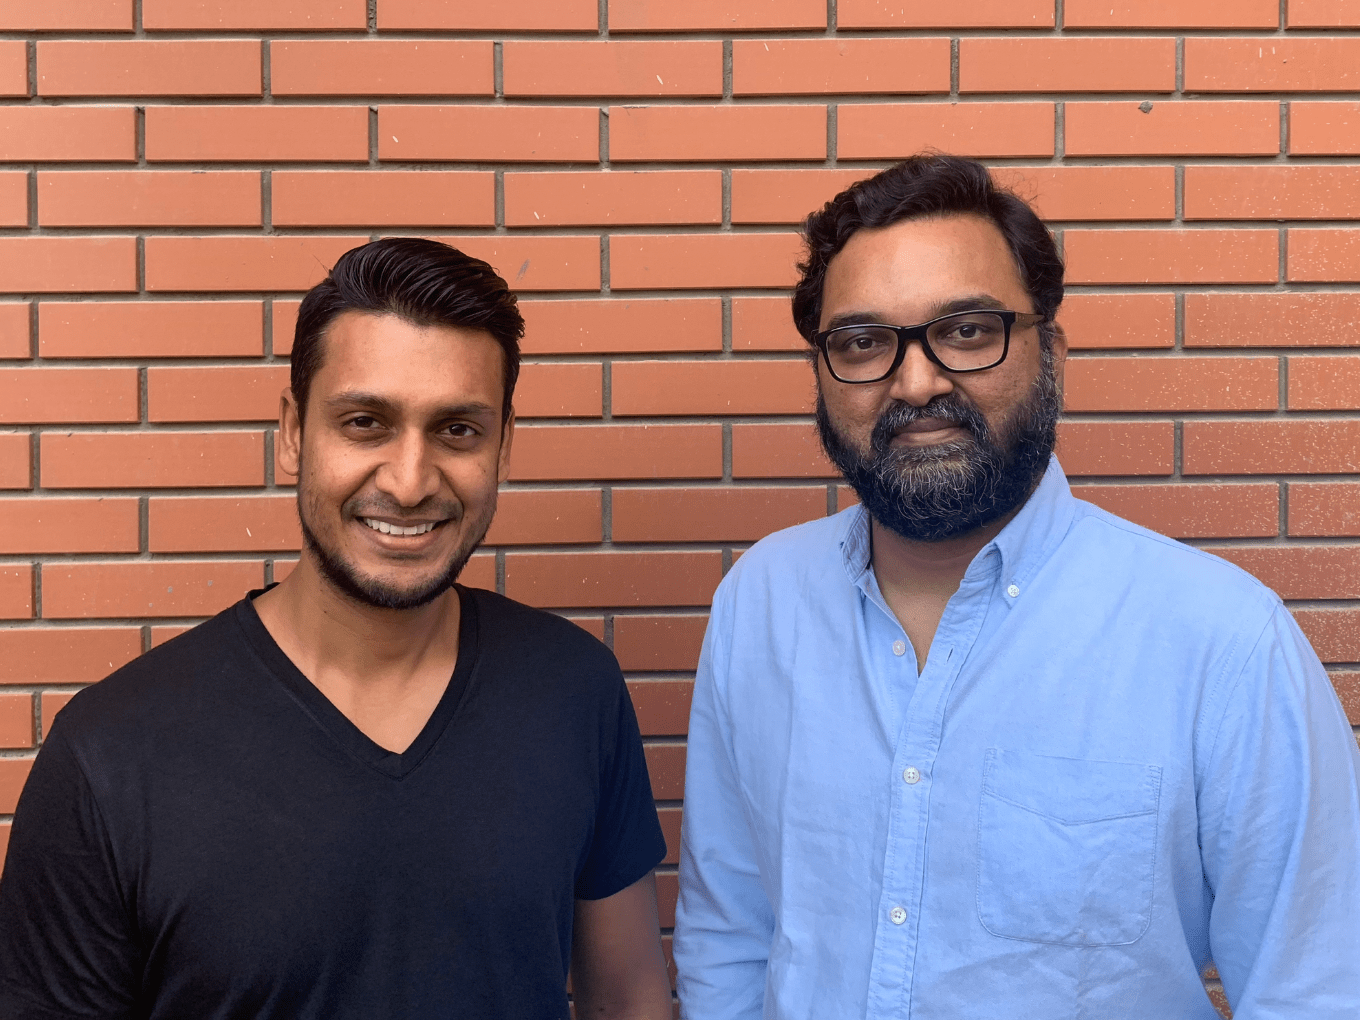 Wasabi Raises $1.8 Mn Seed Fund To Build Communication And Growth Platform For MSMEs